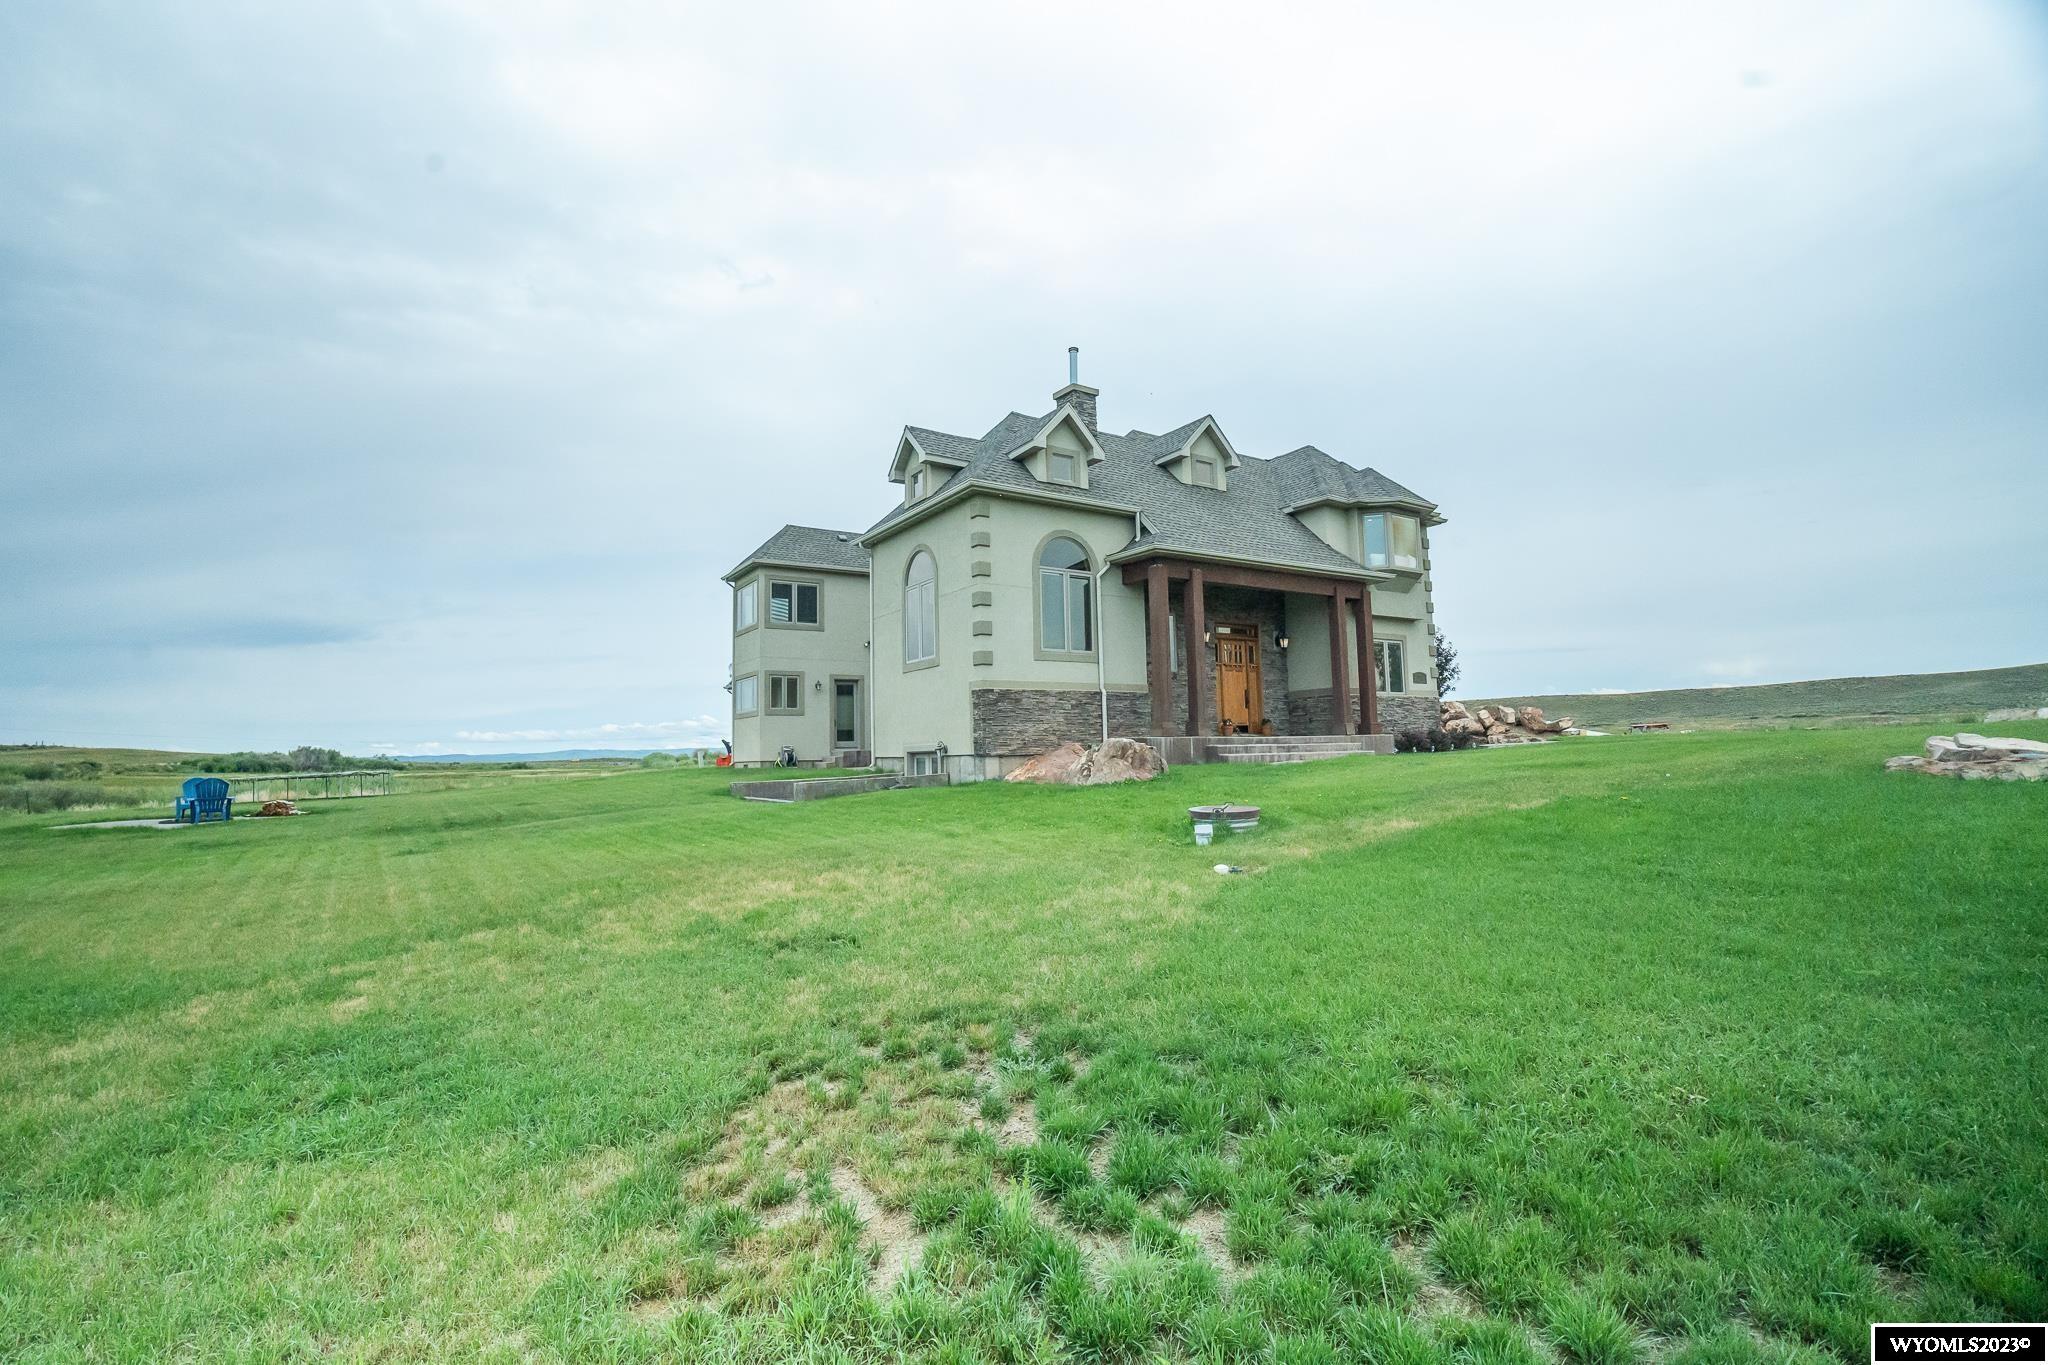 This elegant single family home sits on 32.91 acres in beautiful Wyoming. 15 minutes north of Evanston, and minutes to"Wyoming Downs" horse racing. A private entrance, large dirt bike track, irrigation canals around the property, chicken coop, fire pit, and irrigated pasture land. Upon entrance, you are warmly greeted by title/laminate floors, huge chandelier, and open floor plan seamlessly connecting the kitchen to the living room and leading to the inviting, beautiful backyard. Meticulous attention to detail is presented in the open kitchen, with granite counter tops, commercial grade appliances, a warming tray, drink cooler, and a built in Espresso Machine. Adjacent to the living room, there's a comfortable bedroom with a joining bathroom and an office/library with a fireplace. Upstate you'll find two bedrooms with a bathroom and the Master Suite. Beautiful views, his and her own walking closet, bathtub/jacuzzi with color lights, double shower with a steamer, . Downstairs is an extra room currently used as a gym, half bathroom, and a bar. The backyard is quiet, peaceful,and a large patio provides plentiful space for entertaining. The home is equipped with speakers and sound system in all bedrooms and family room